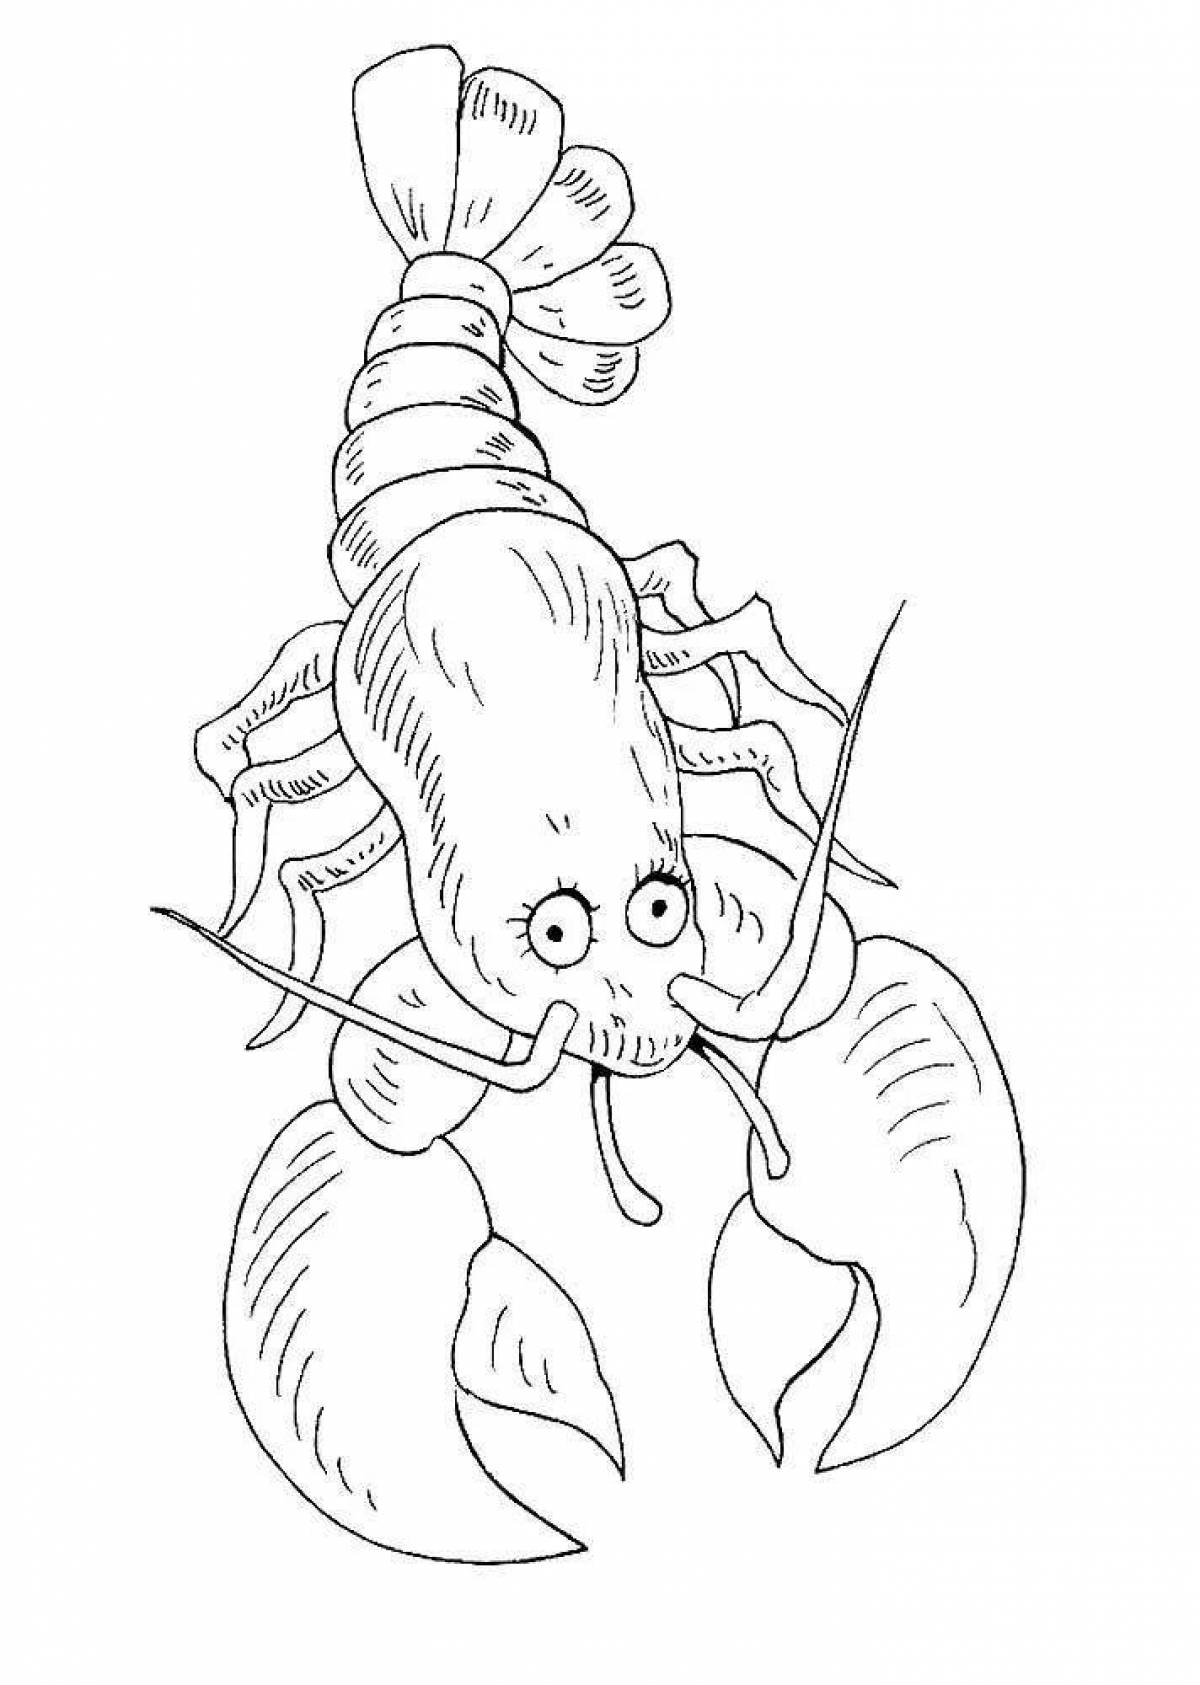 Sparkling lobster coloring page